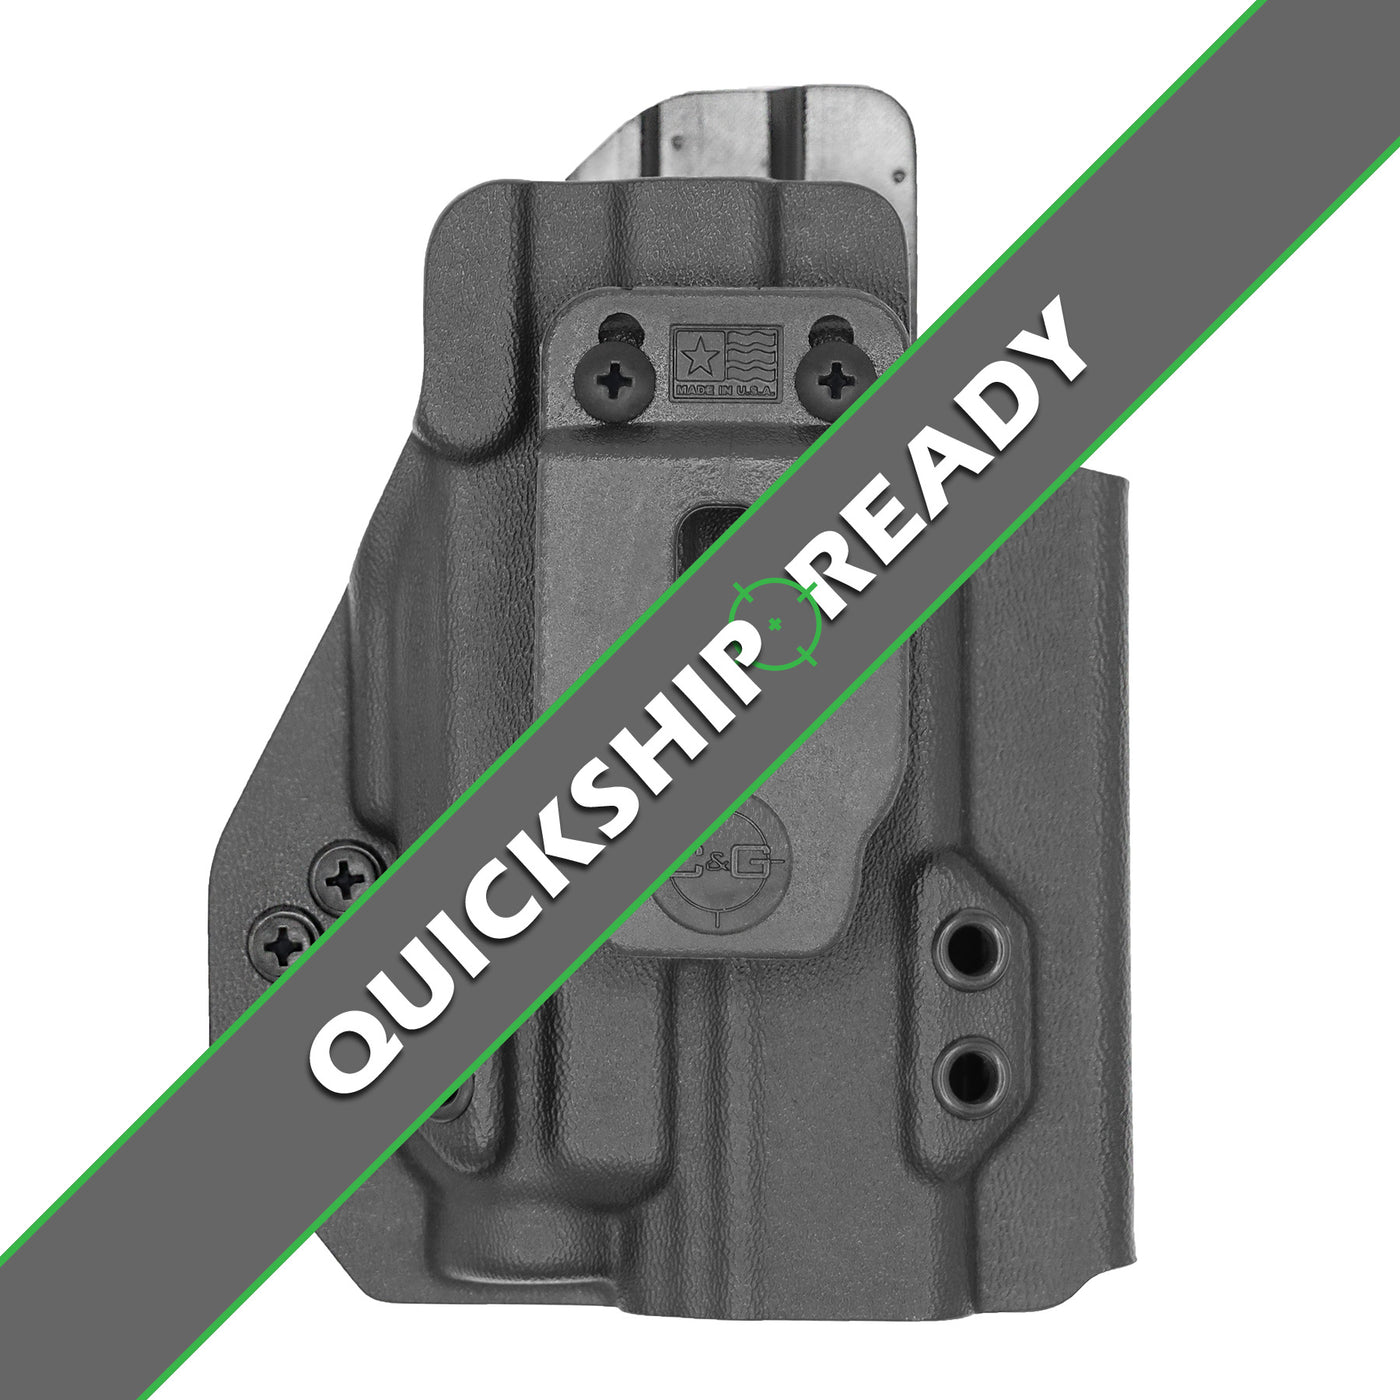 C&G Holsters quickship IWB Tactical OZ9/c streamlight tlr7/a